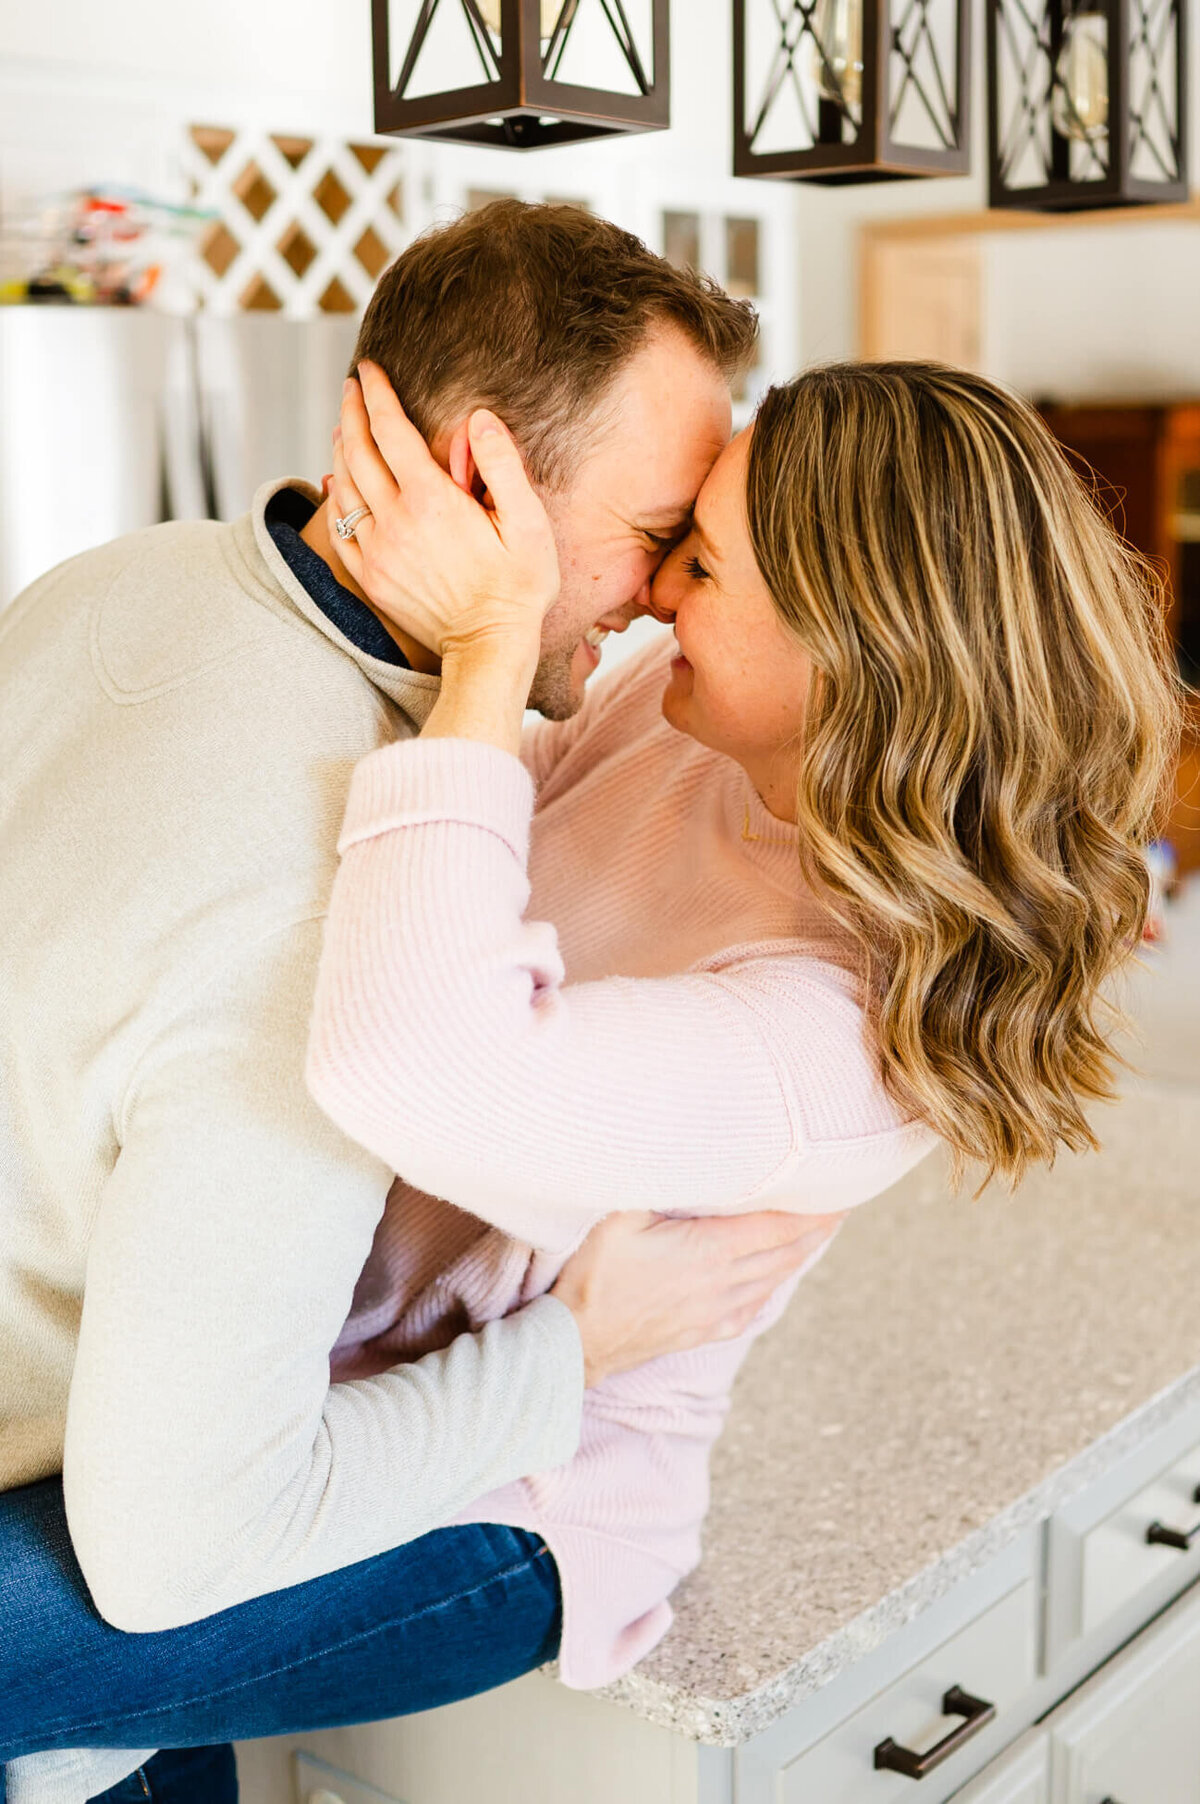 Loving married couple laughing and embracing each other during a in home couples session in Naperville, IL.